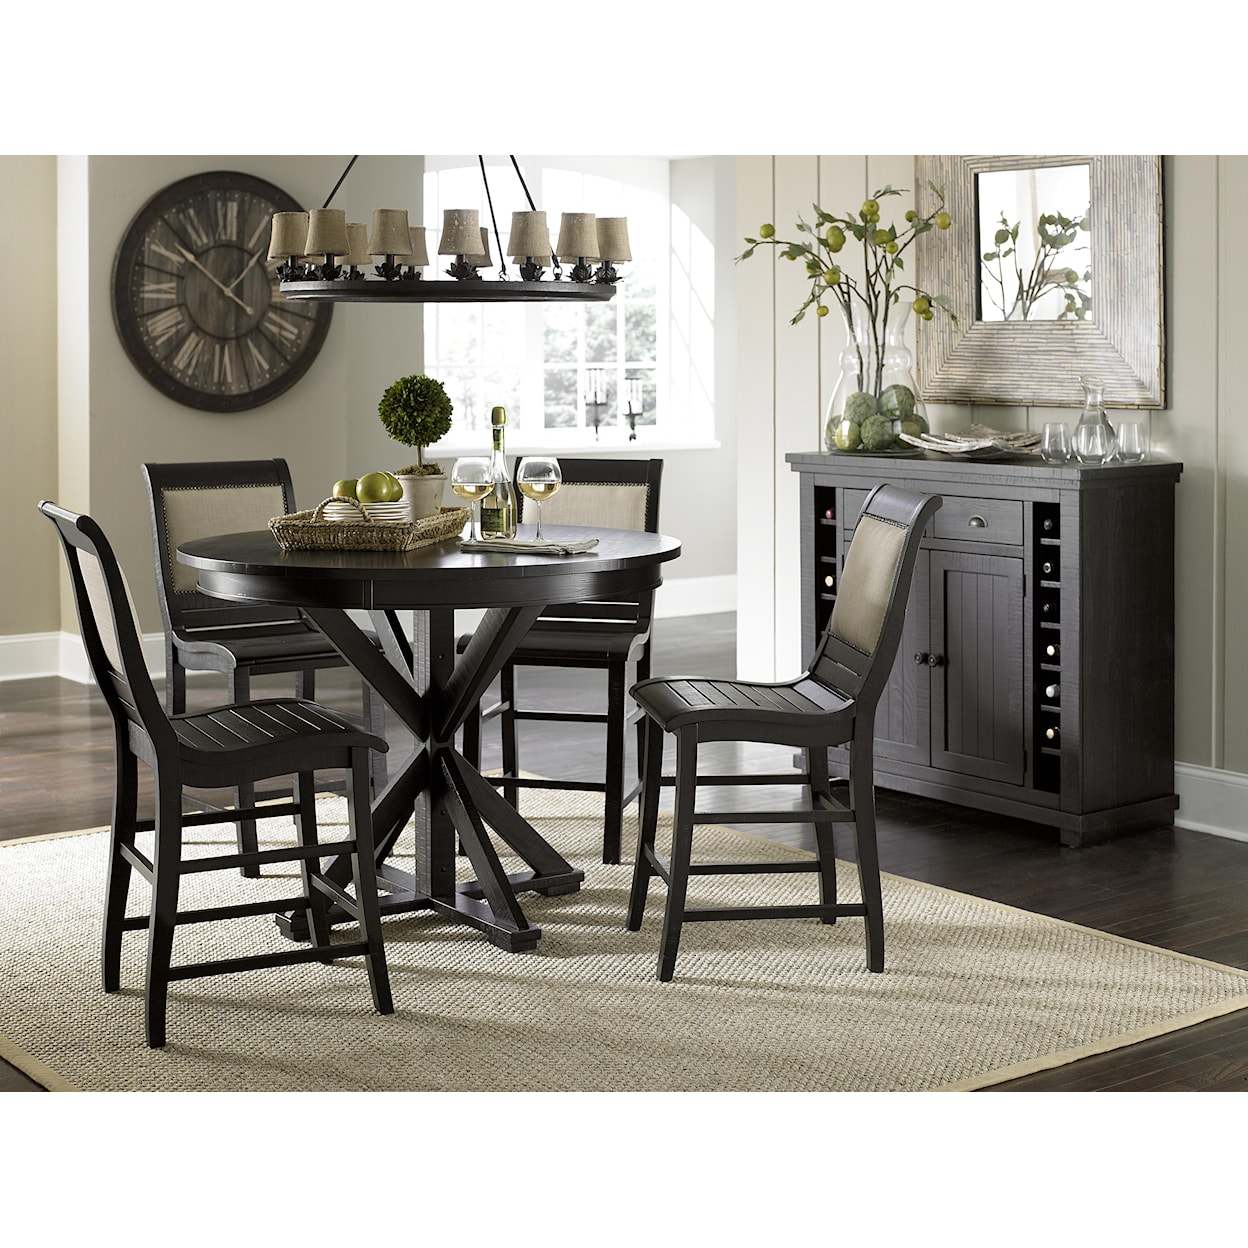 Carolina Chairs Willow Dining Casual Dining Room Group